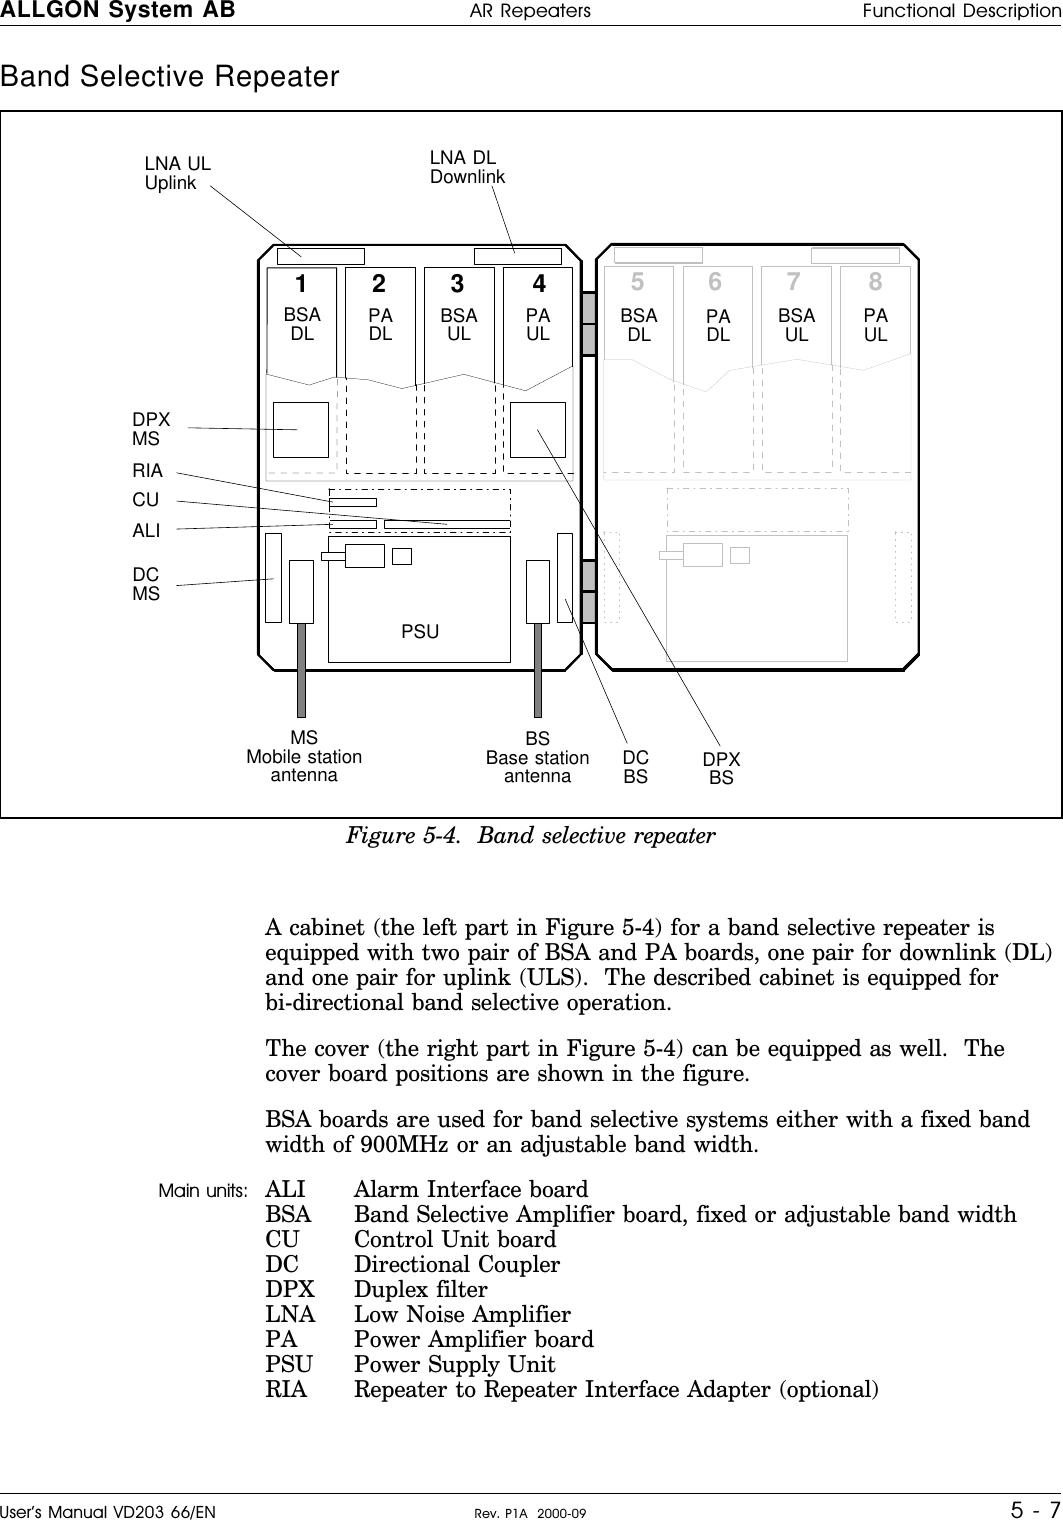 Band Selective Repeater         A cabinet (the left part in Figure 5-4) for a band selective repeater isequipped with two pair of BSA and PA boards, one pair for downlink (DL)and one pair for uplink (ULS).  The described cabinet is equipped forbi-directional band selective operation.The cover (the right part in Figure 5-4) can be equipped as well.  Thecover board positions are shown in the figure.BSA boards are used for band selective systems either with a fixed bandwidth of 900MHz or an adjustable band width.Main units: ALI Alarm Interface boardBSA Band Selective Amplifier board, fixed or adjustable band widthCU Control Unit boardDC Directional CouplerDPX Duplex filterLNA Low Noise AmplifierPA Power Amplifier boardPSU Power Supply UnitRIA Repeater to Repeater Interface Adapter (optional)123 4 567 8BSADLMSMobile stationantennaBSBase stationantennaPADL BSAUL PAULLNA DLDownlinkLNA ULUplinkDPXMSDCMSCUALIDCBS DPXBSPSURIABSADL PADL BSAUL PAULFigure 5-4.  Band selective repeaterALLGON System AB AR Repeaters Functional DescriptionUser’s Manual VD203 66/EN Rev. P1A  2000-09 5 - 7